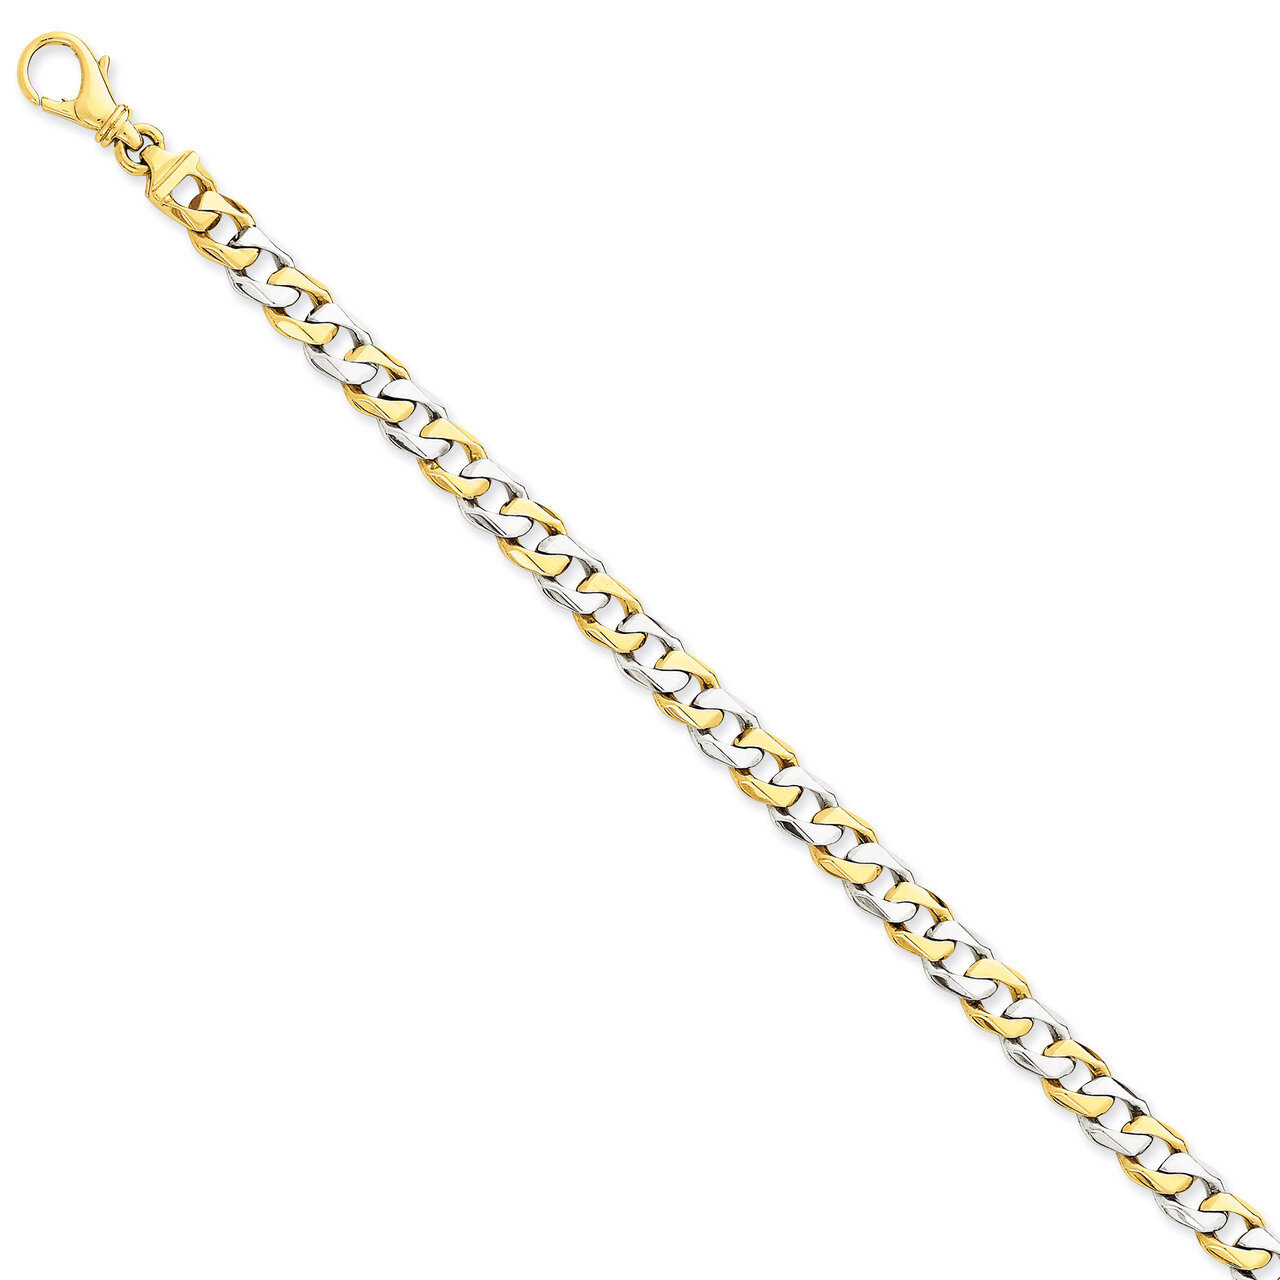 6.85mm Polished Fancy Link Chain 20 Inch 14k Two-Tone Gold LK517-20